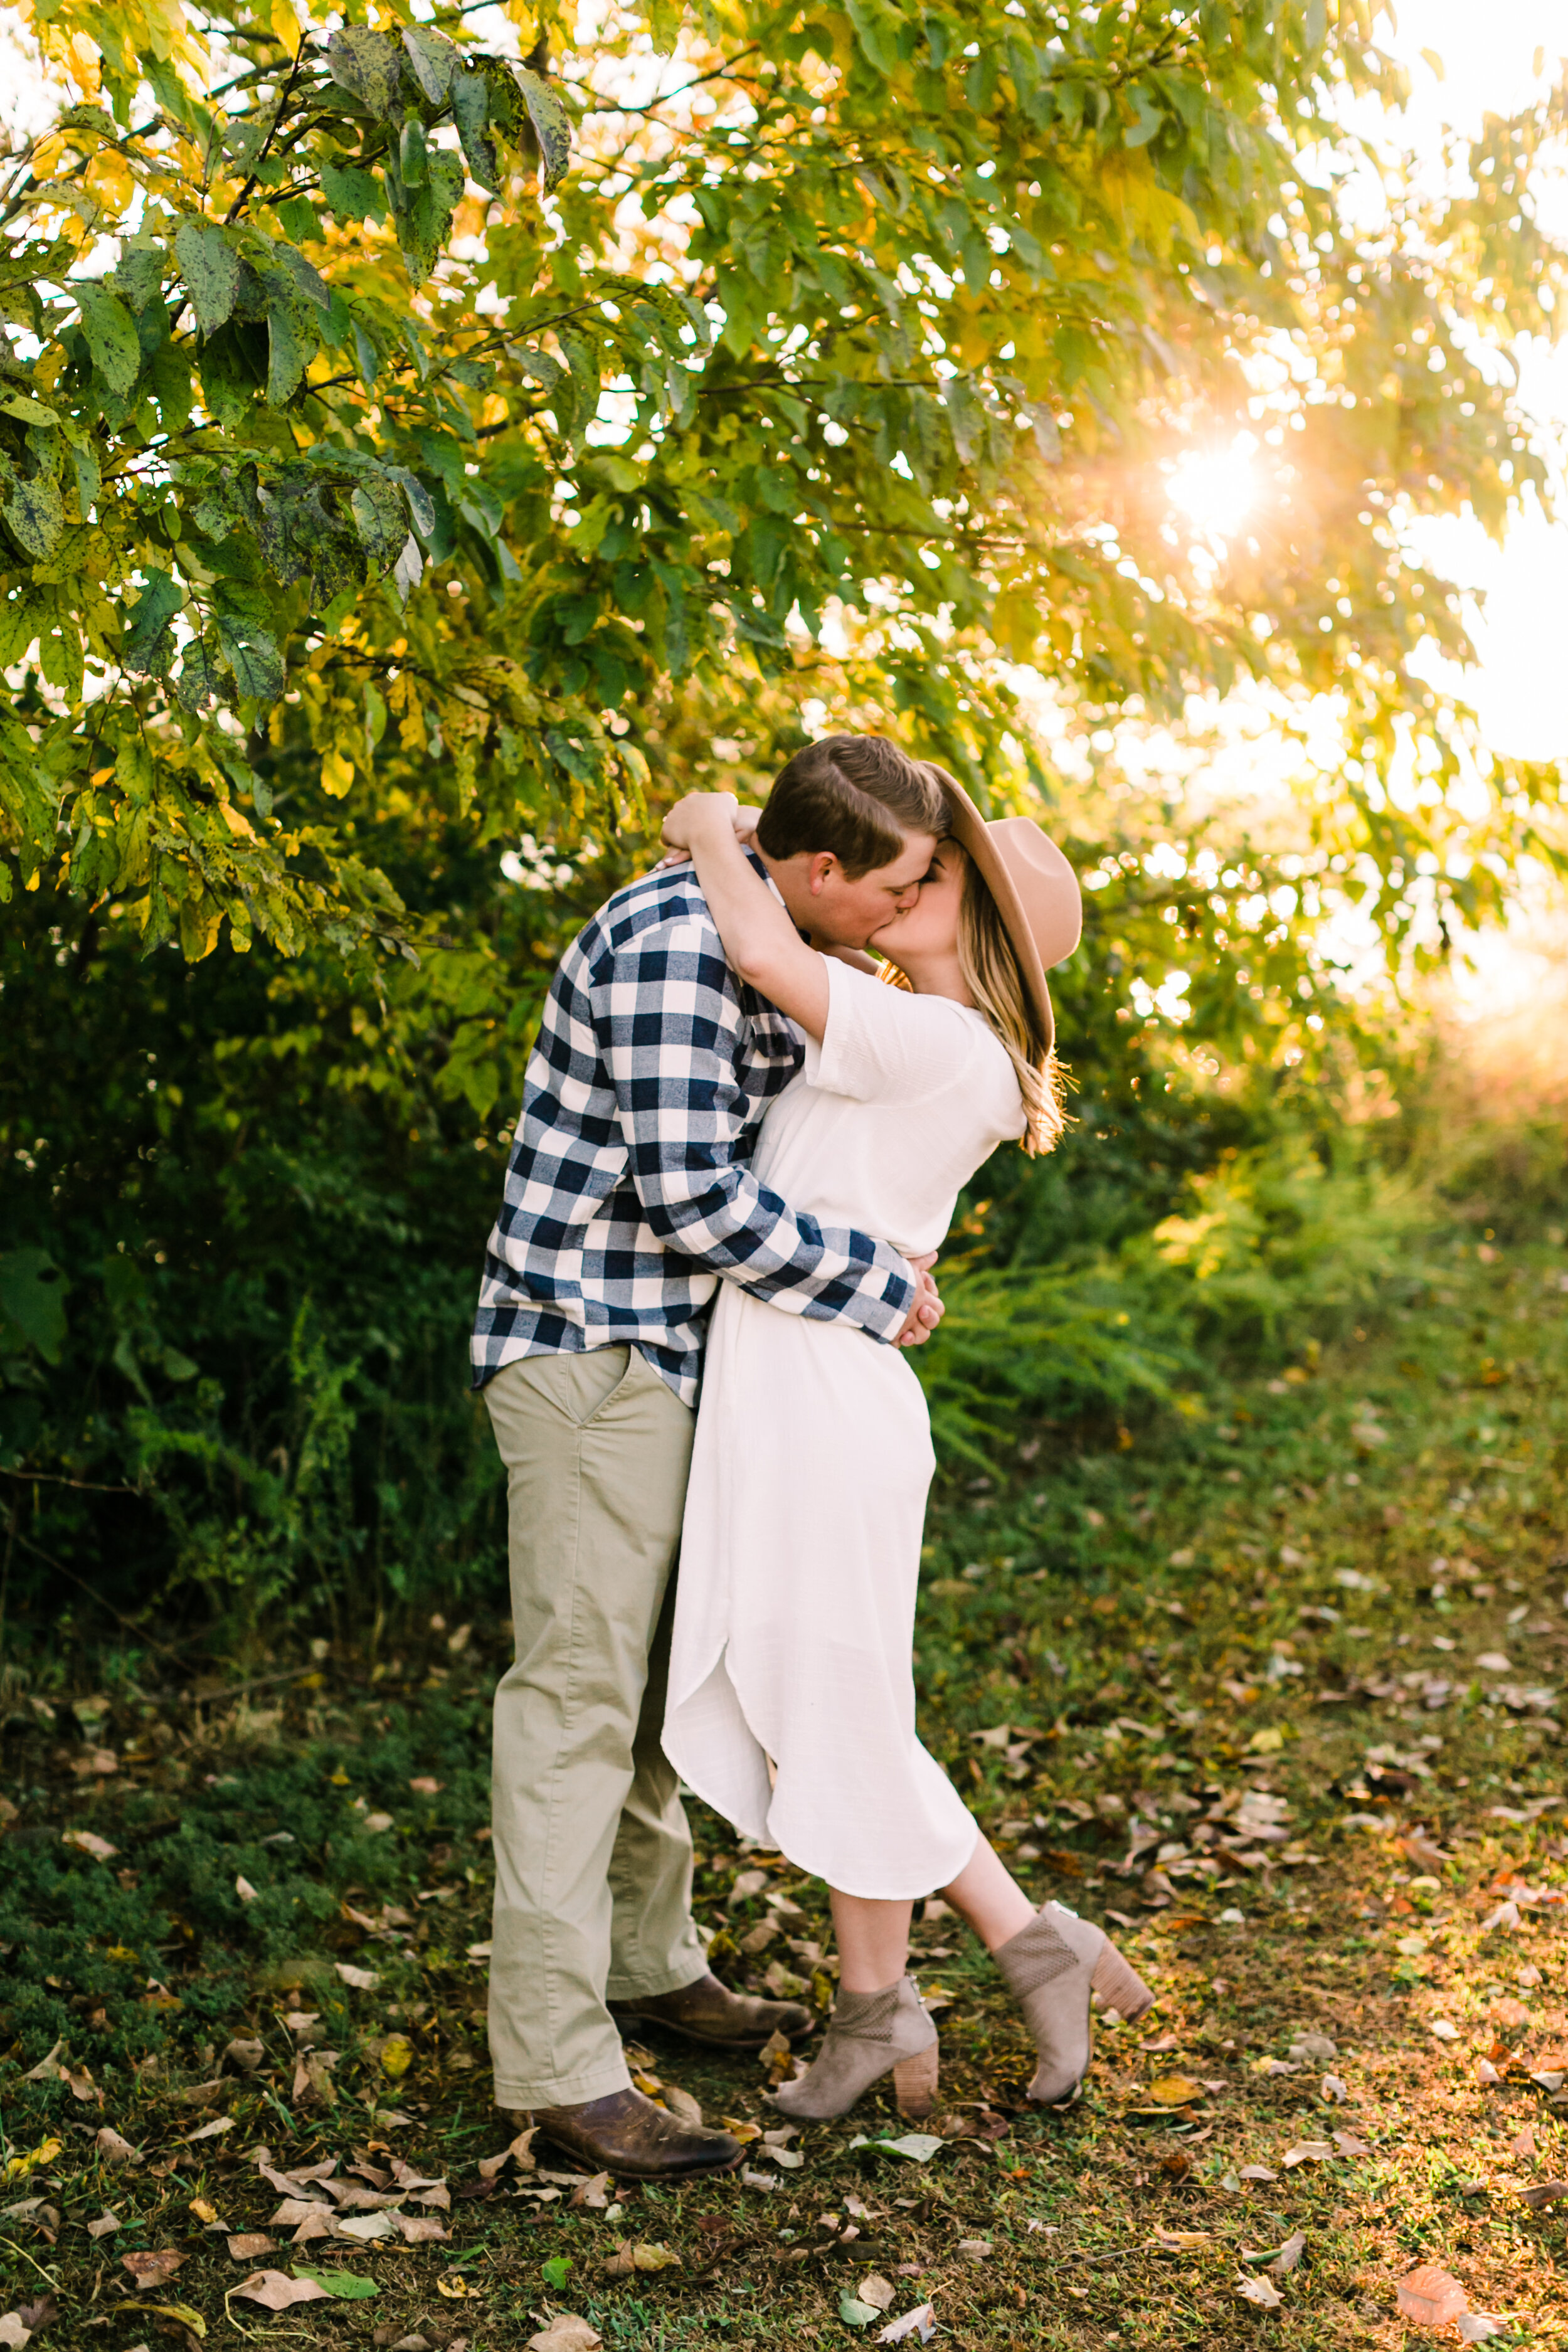 Tennessee+Fall+Engagement+Photos+Puppy (50 of 63).jpg